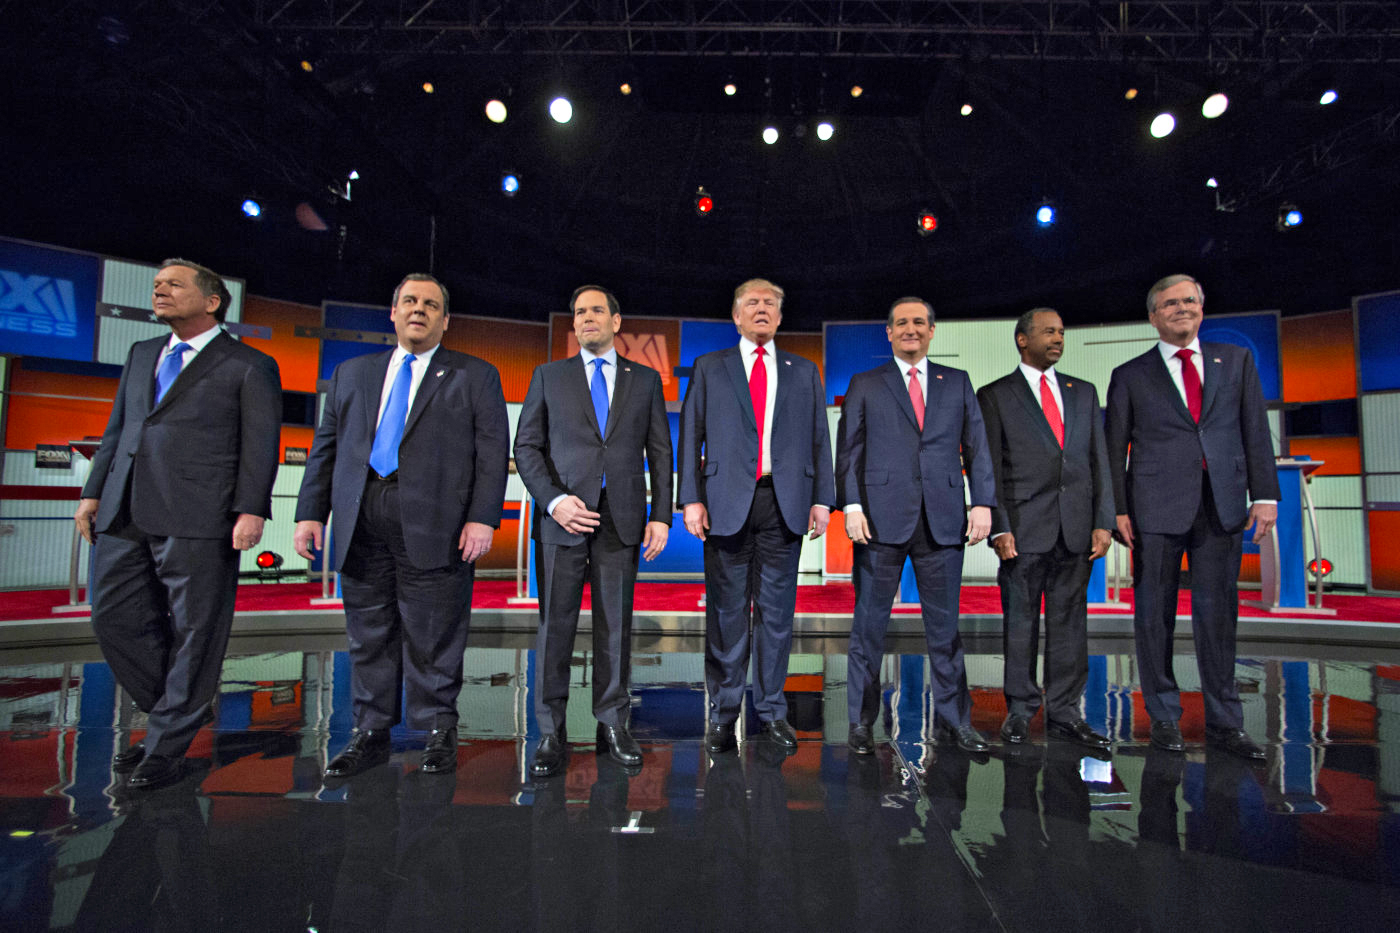 Watch tonight's Republican debate with Engadget